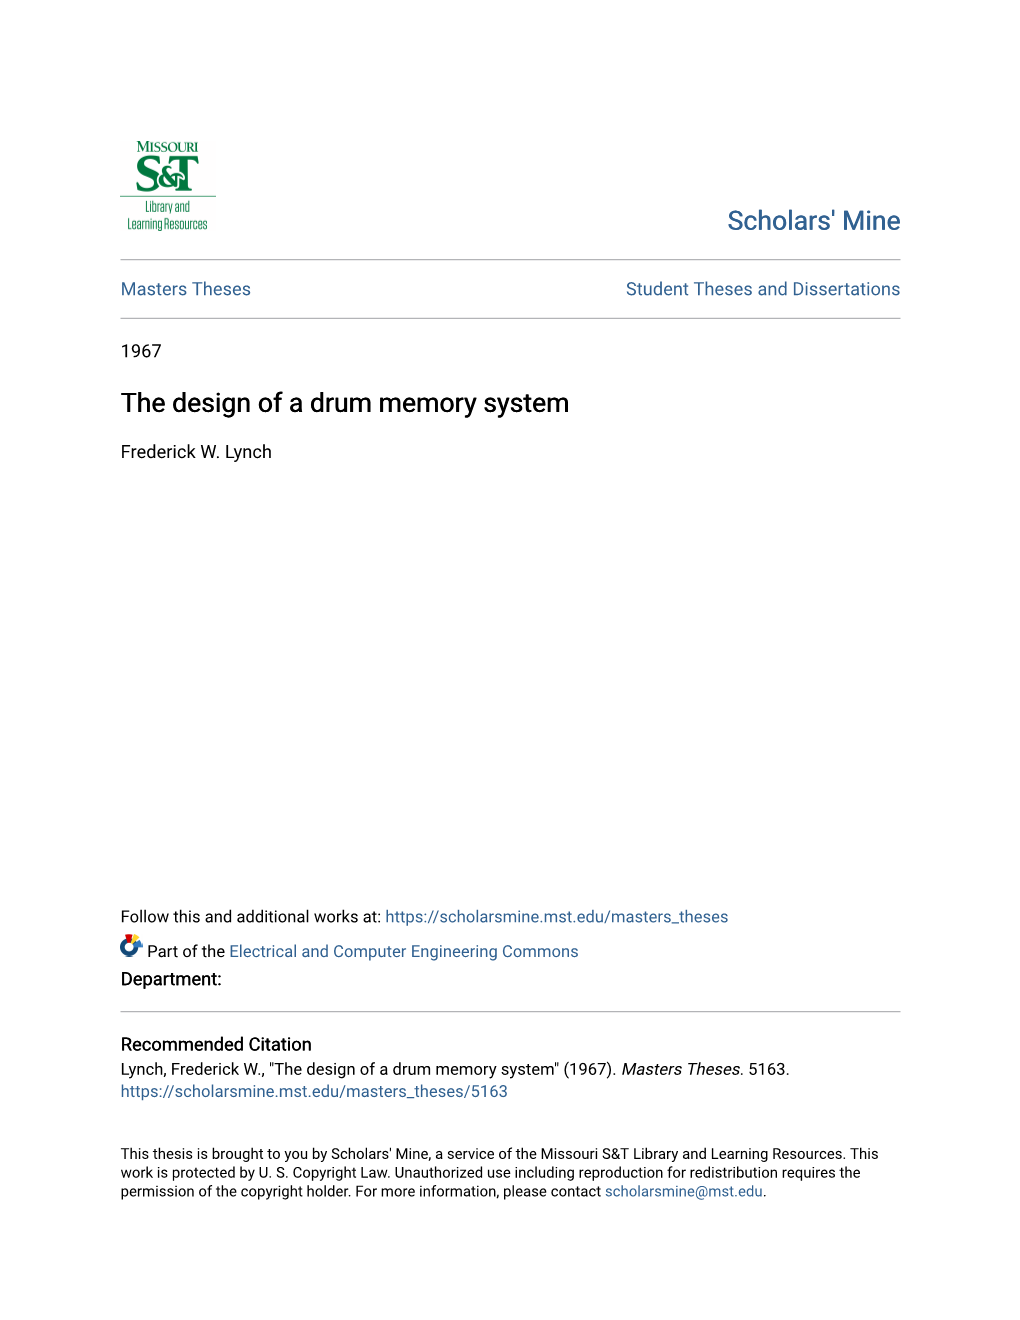 The Design of a Drum Memory System